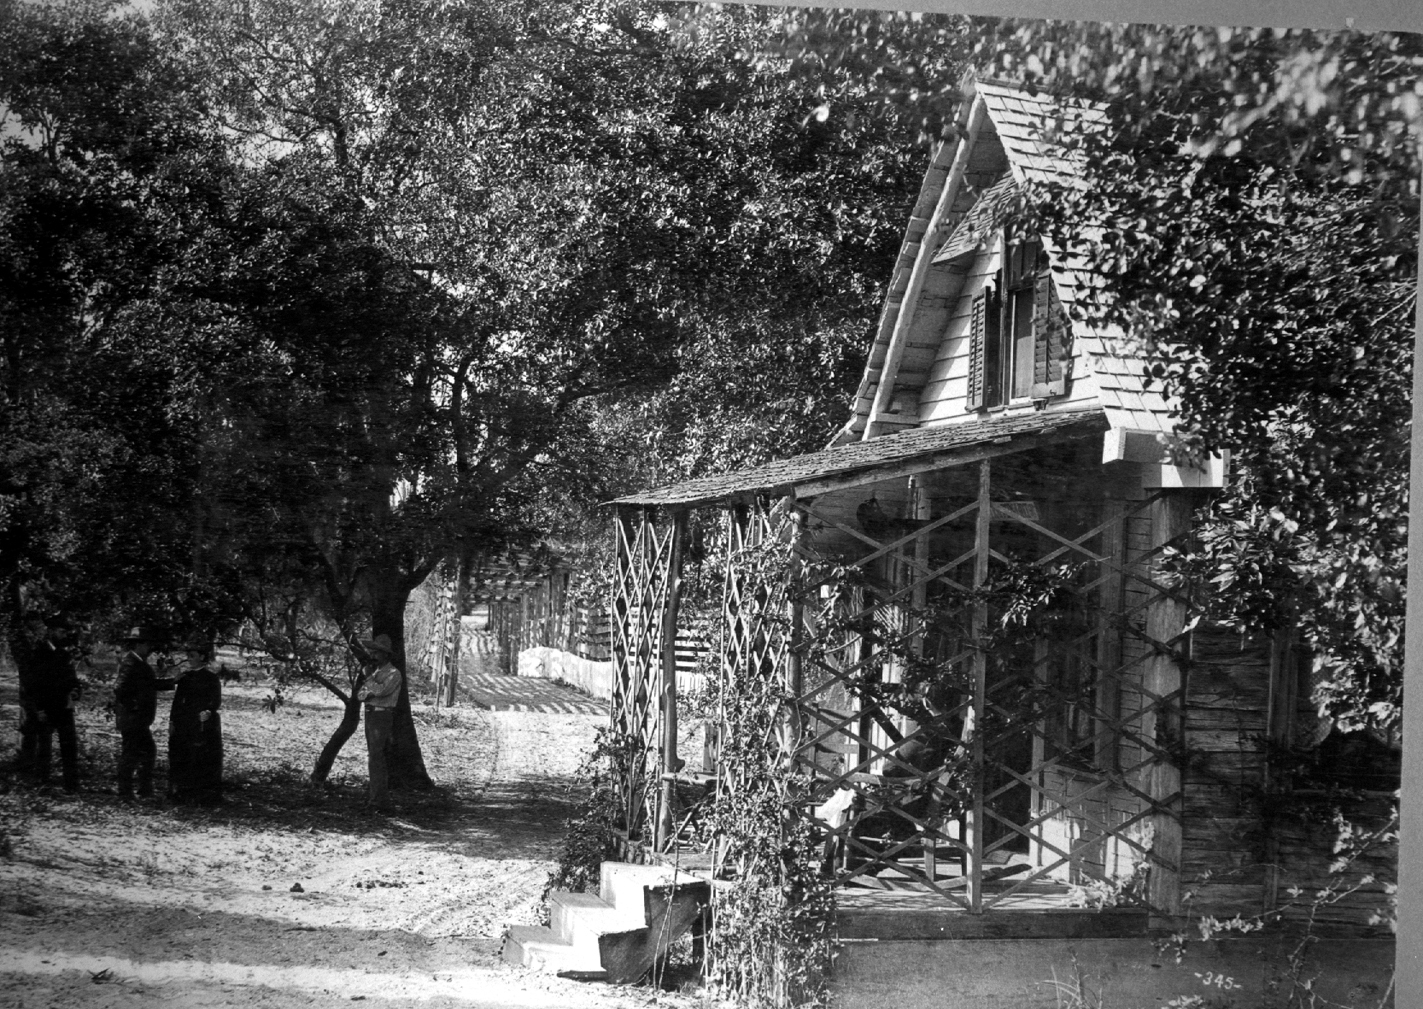 How Trapper's Lodge used to look like. Photo courtesy of the Ormond Beach Historical Society